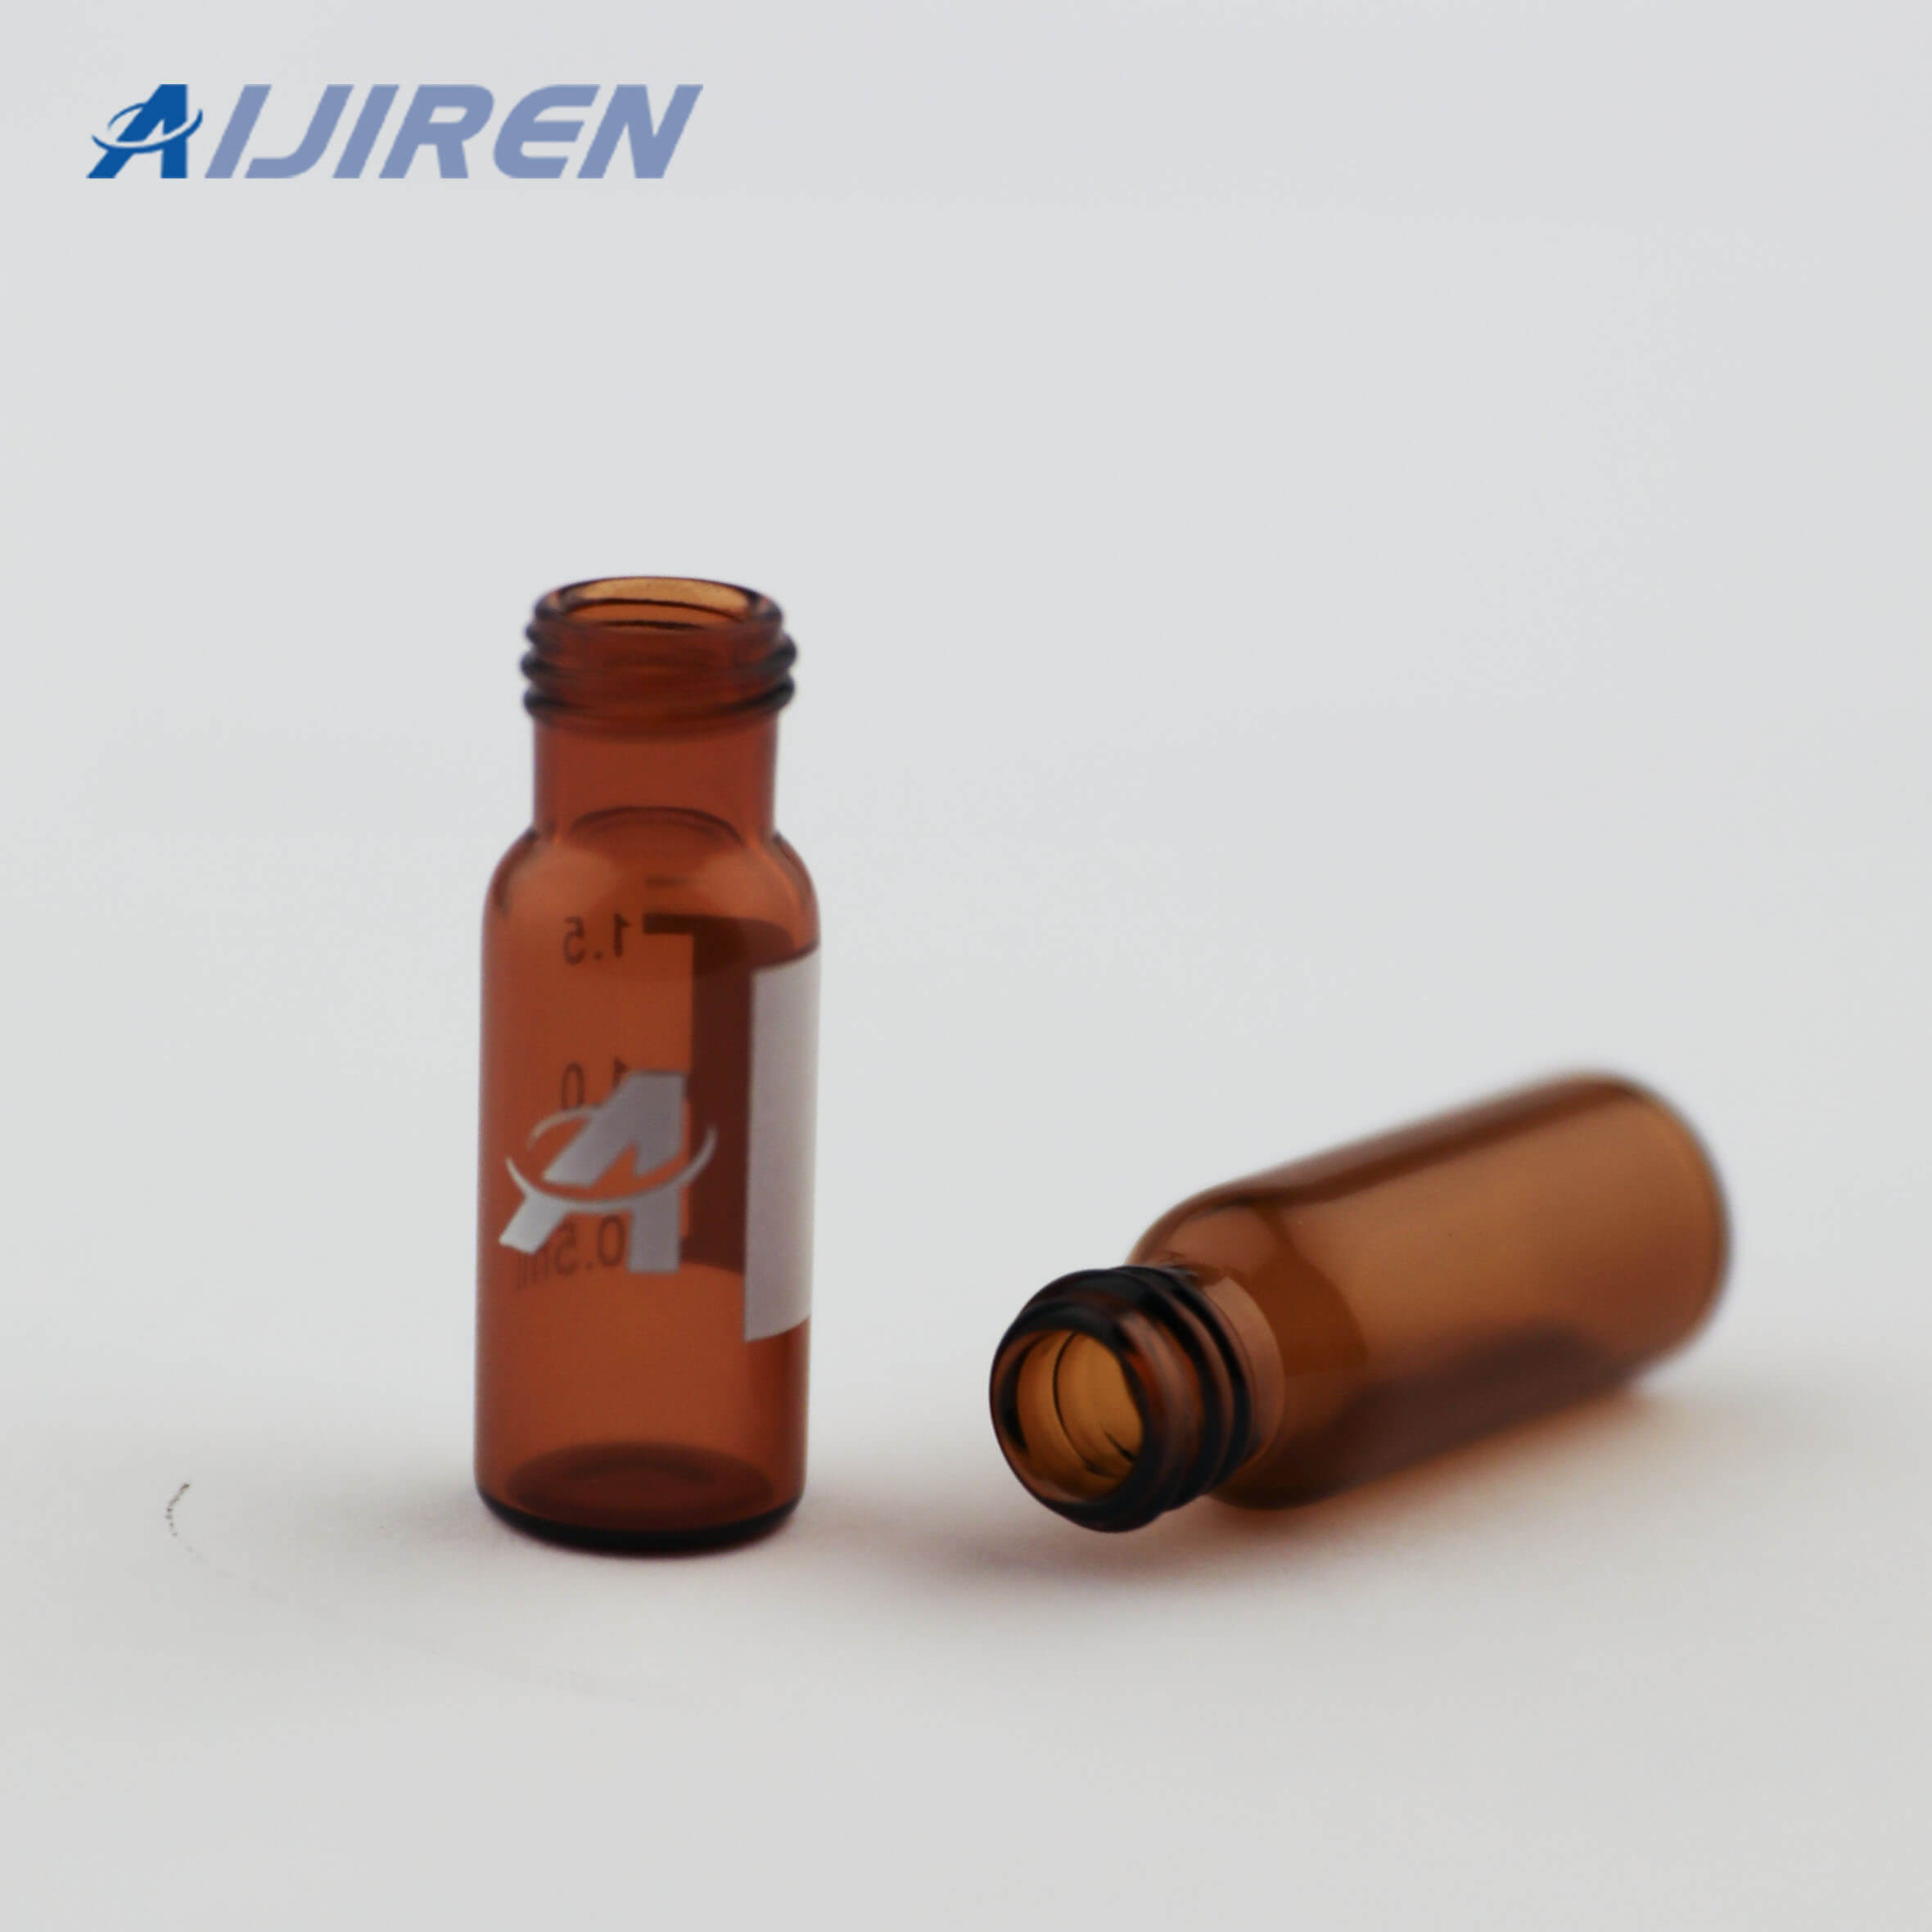 20ml headspace vialAijiren 9mm HPLC Vial in Amber Glass for THERMO FISHER